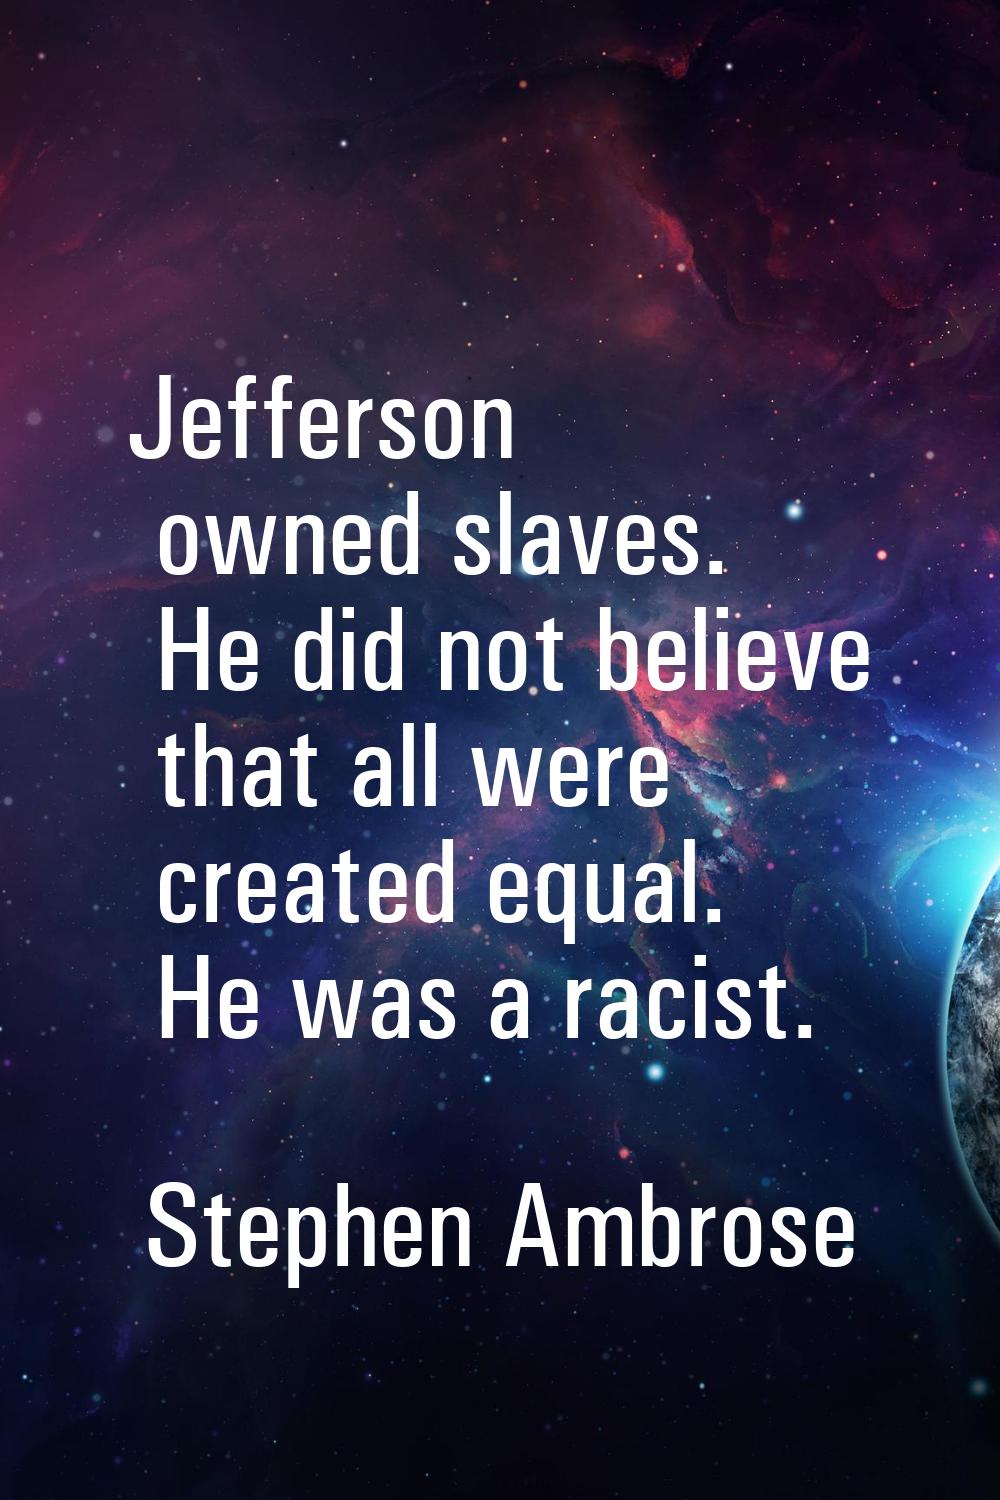 Jefferson owned slaves. He did not believe that all were created equal. He was a racist.